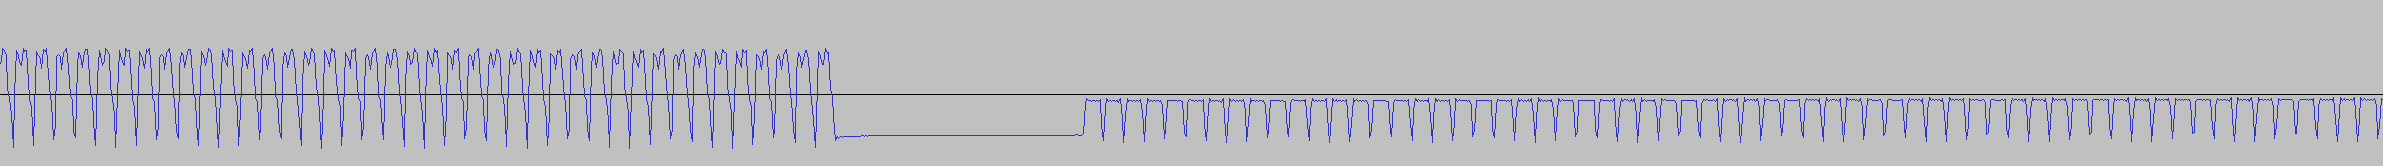 Audacity screenshot of the malformed composite signal.